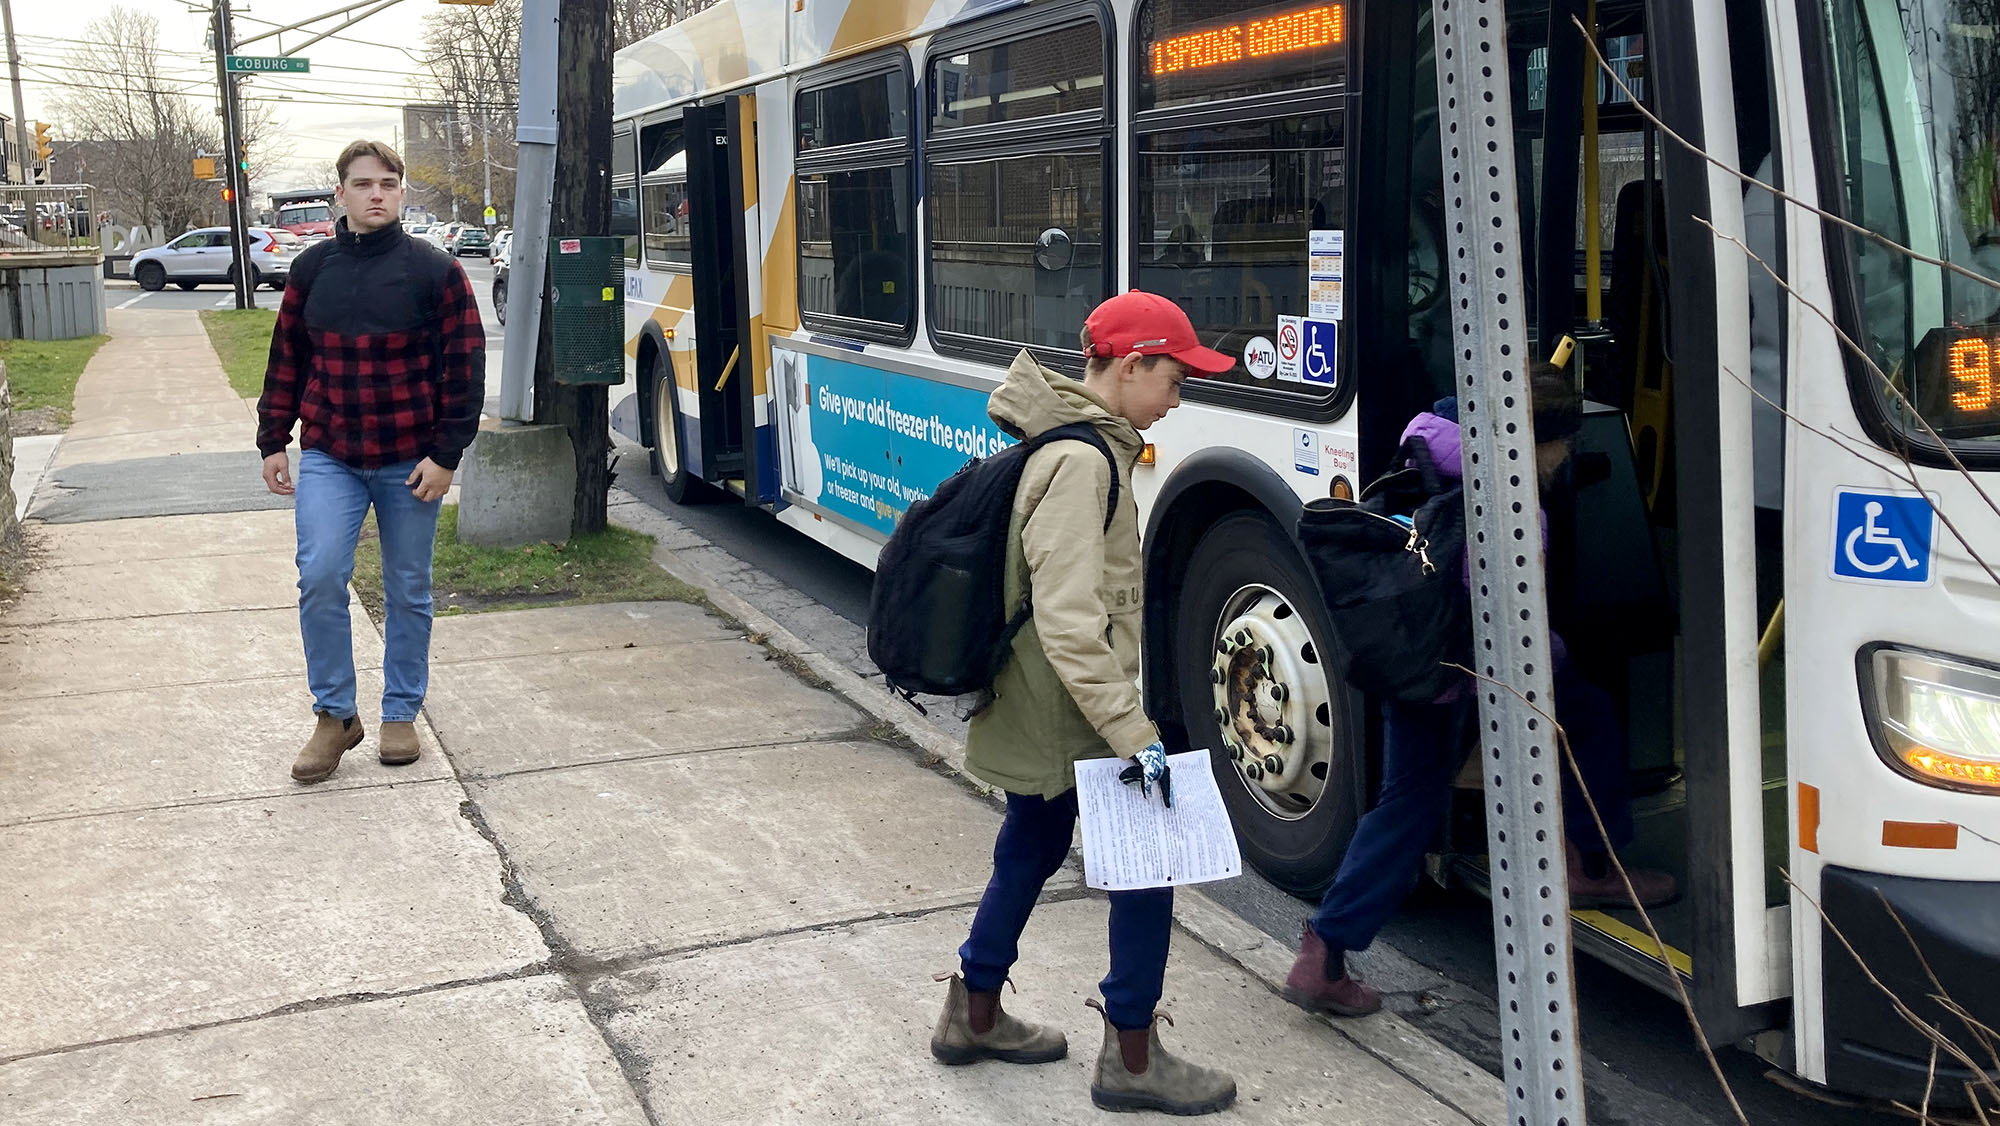 One person boards a Halifax Transit bus, while another leaves it